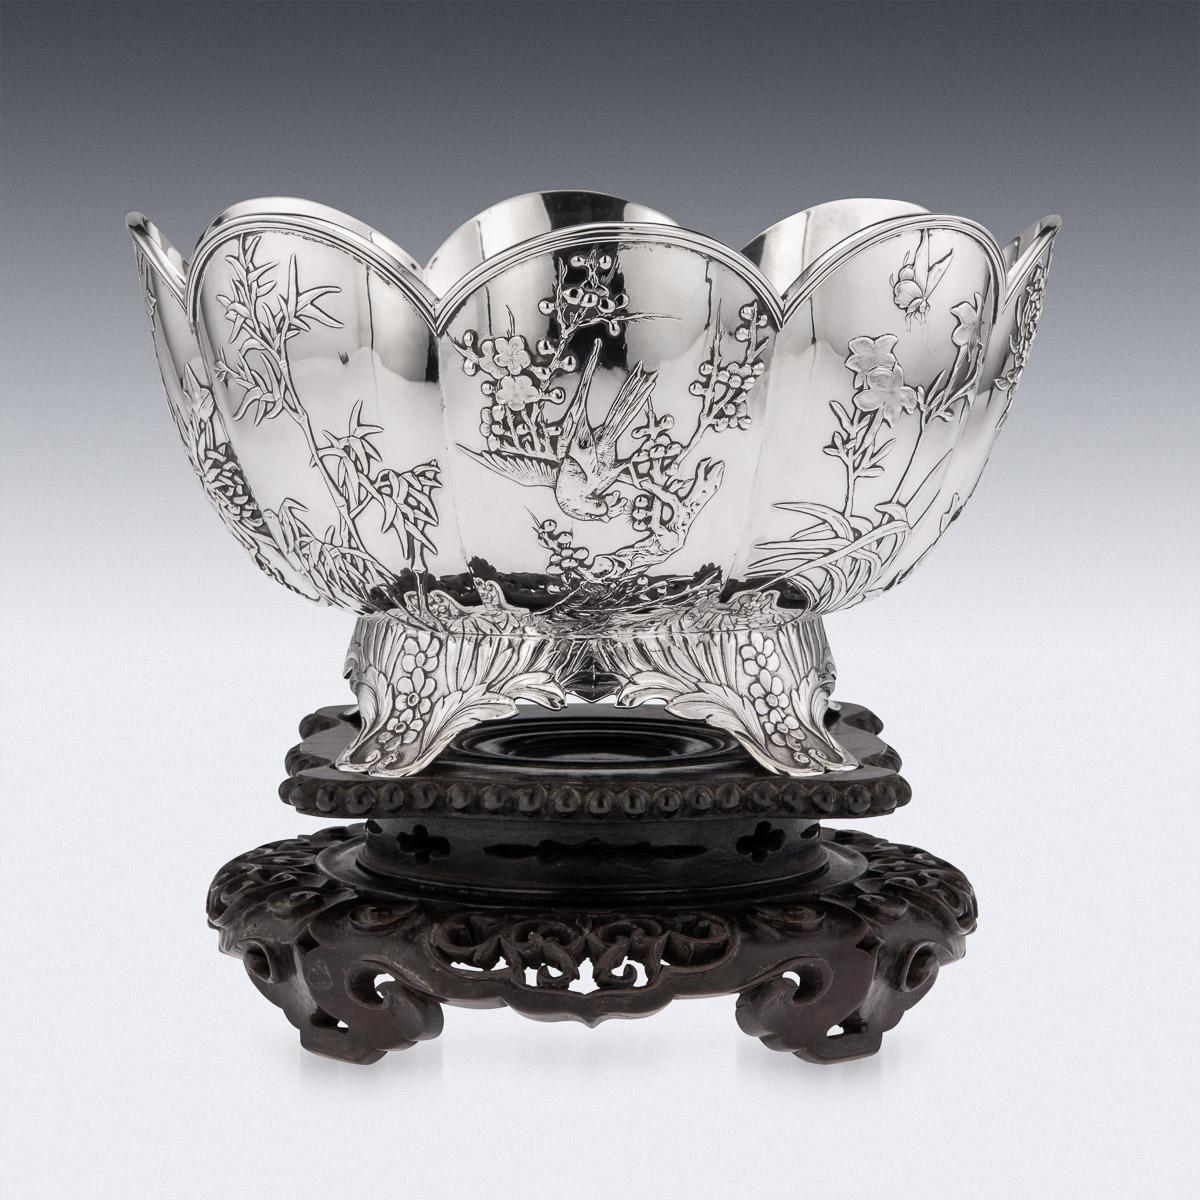 19th Century Chinese Export Solid Silver Bowl on Stand, Wang Hing, c.1890 For Sale 1